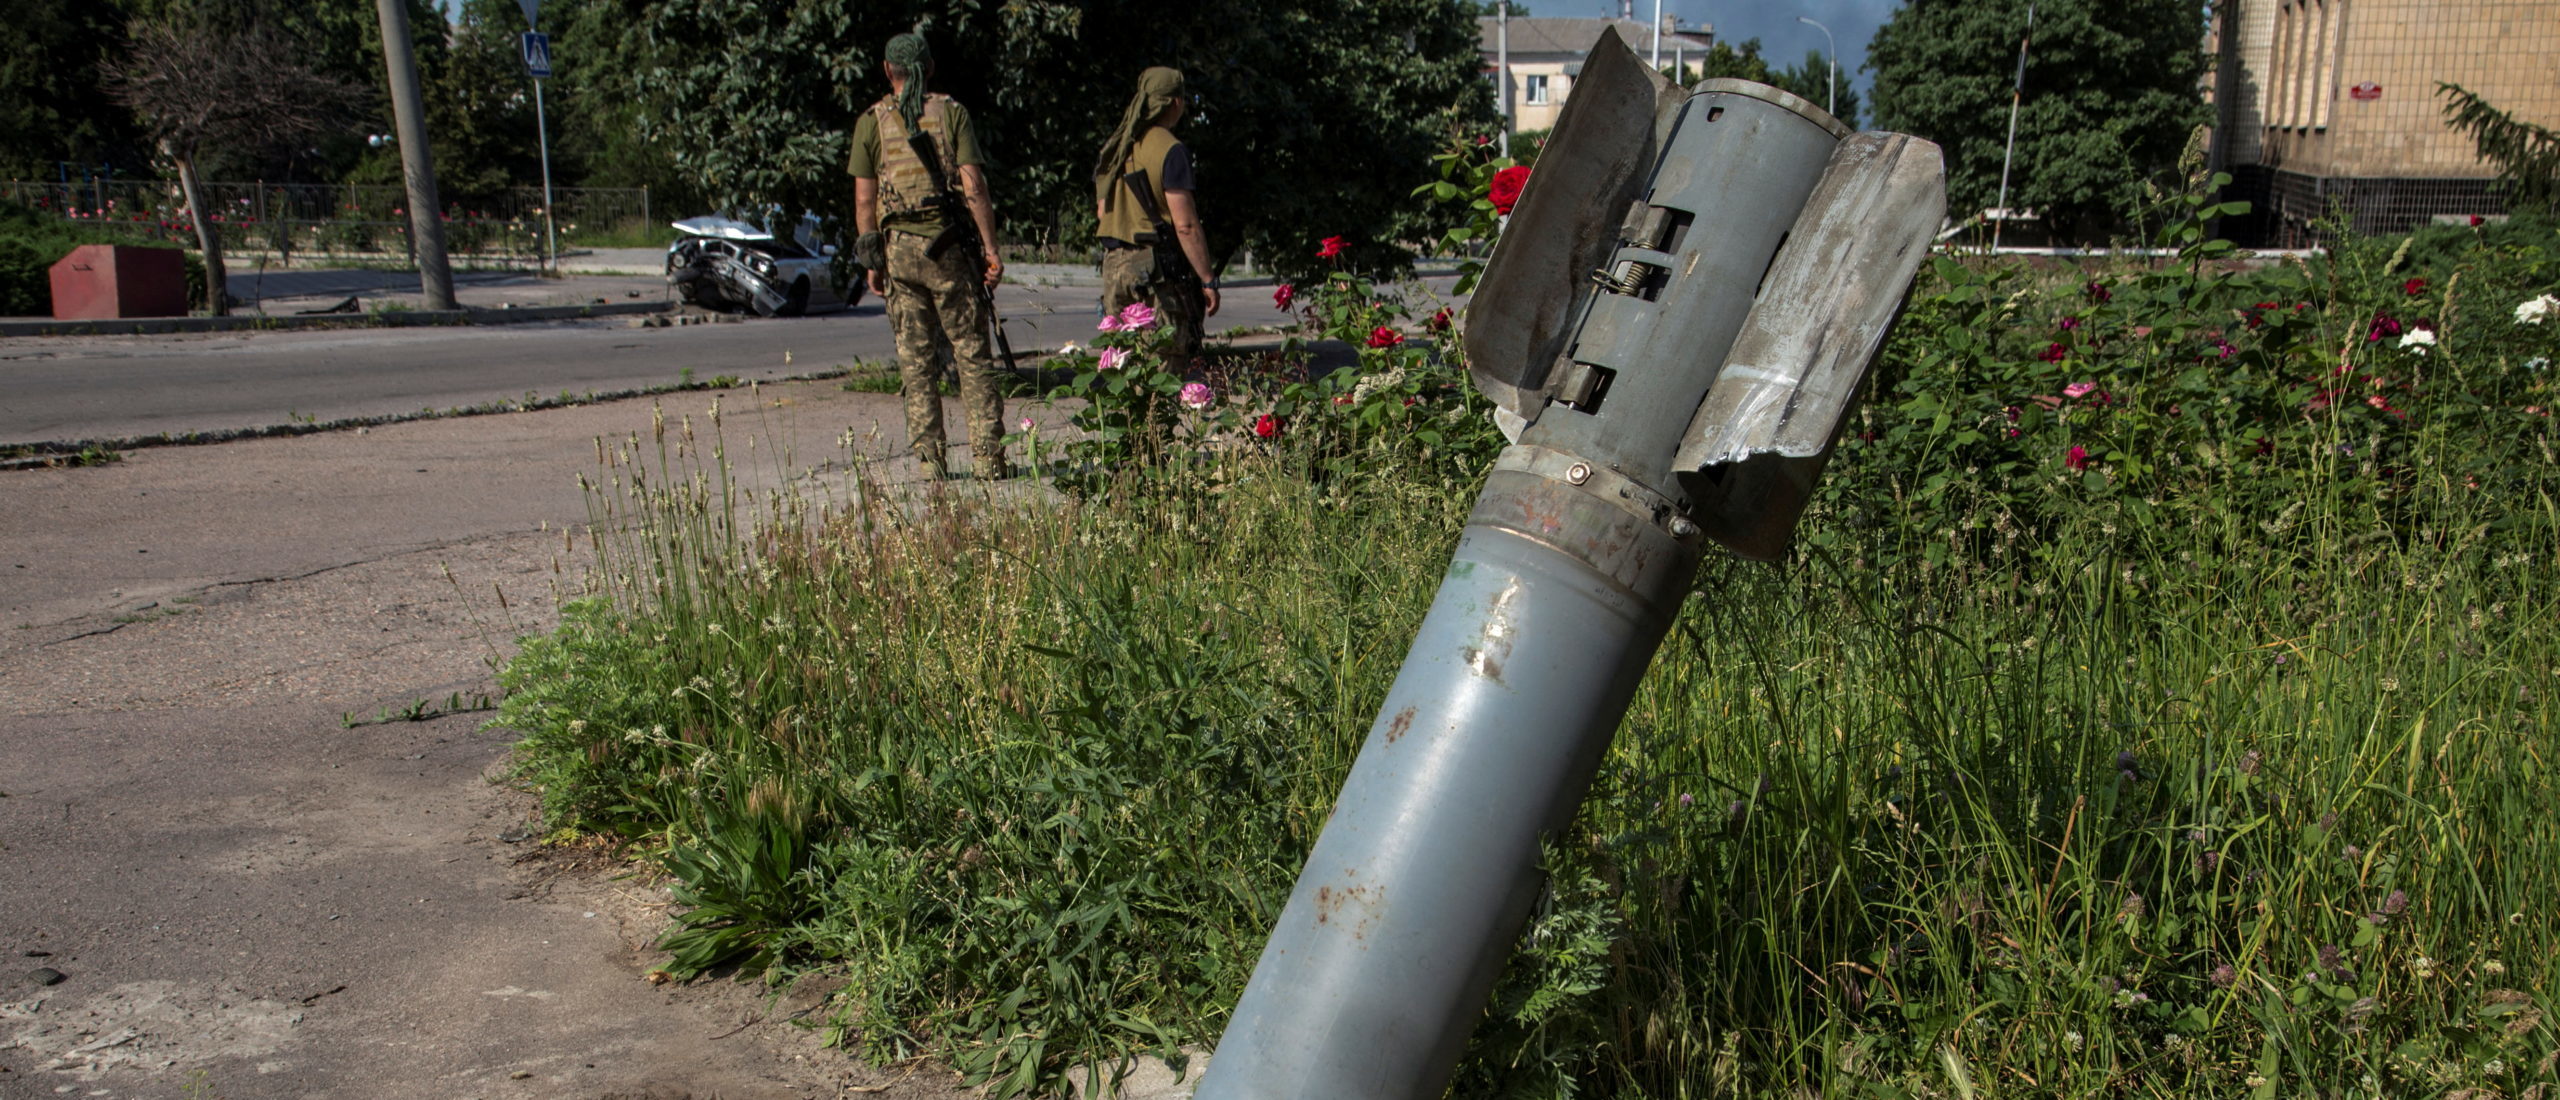 An unexploded shell from a multiple rocket launch system is seen stuck in the ground, as Russia's attack on Ukraine continues, in the town of Lysychansk, Luhansk region, Ukraine June 10, 2022. (REUTERS/Oleksandr Ratushniak)